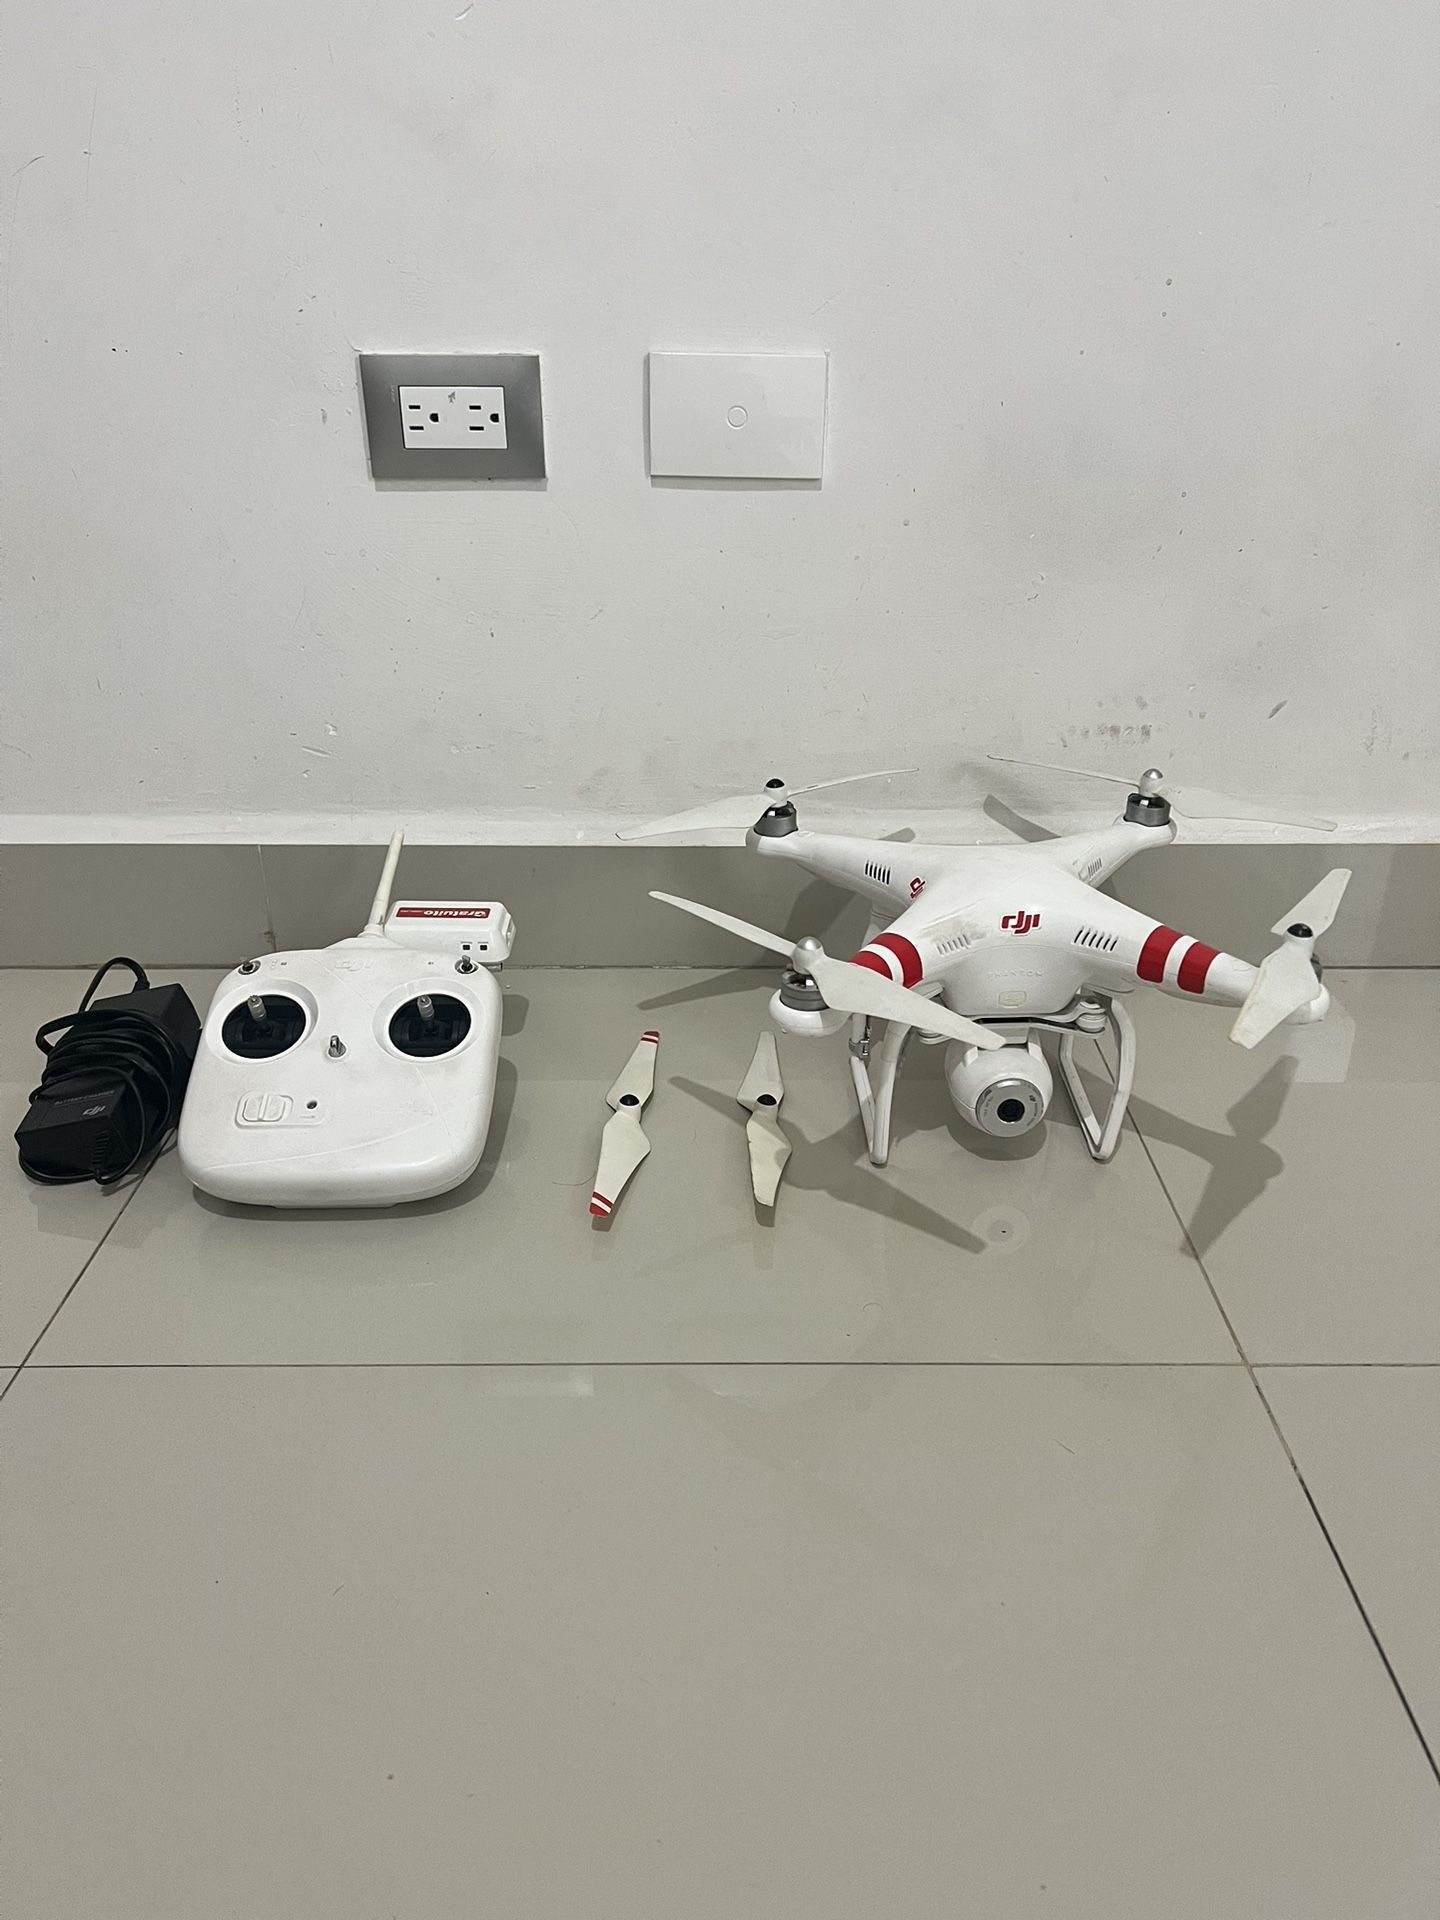 DJI Drone With Extras 